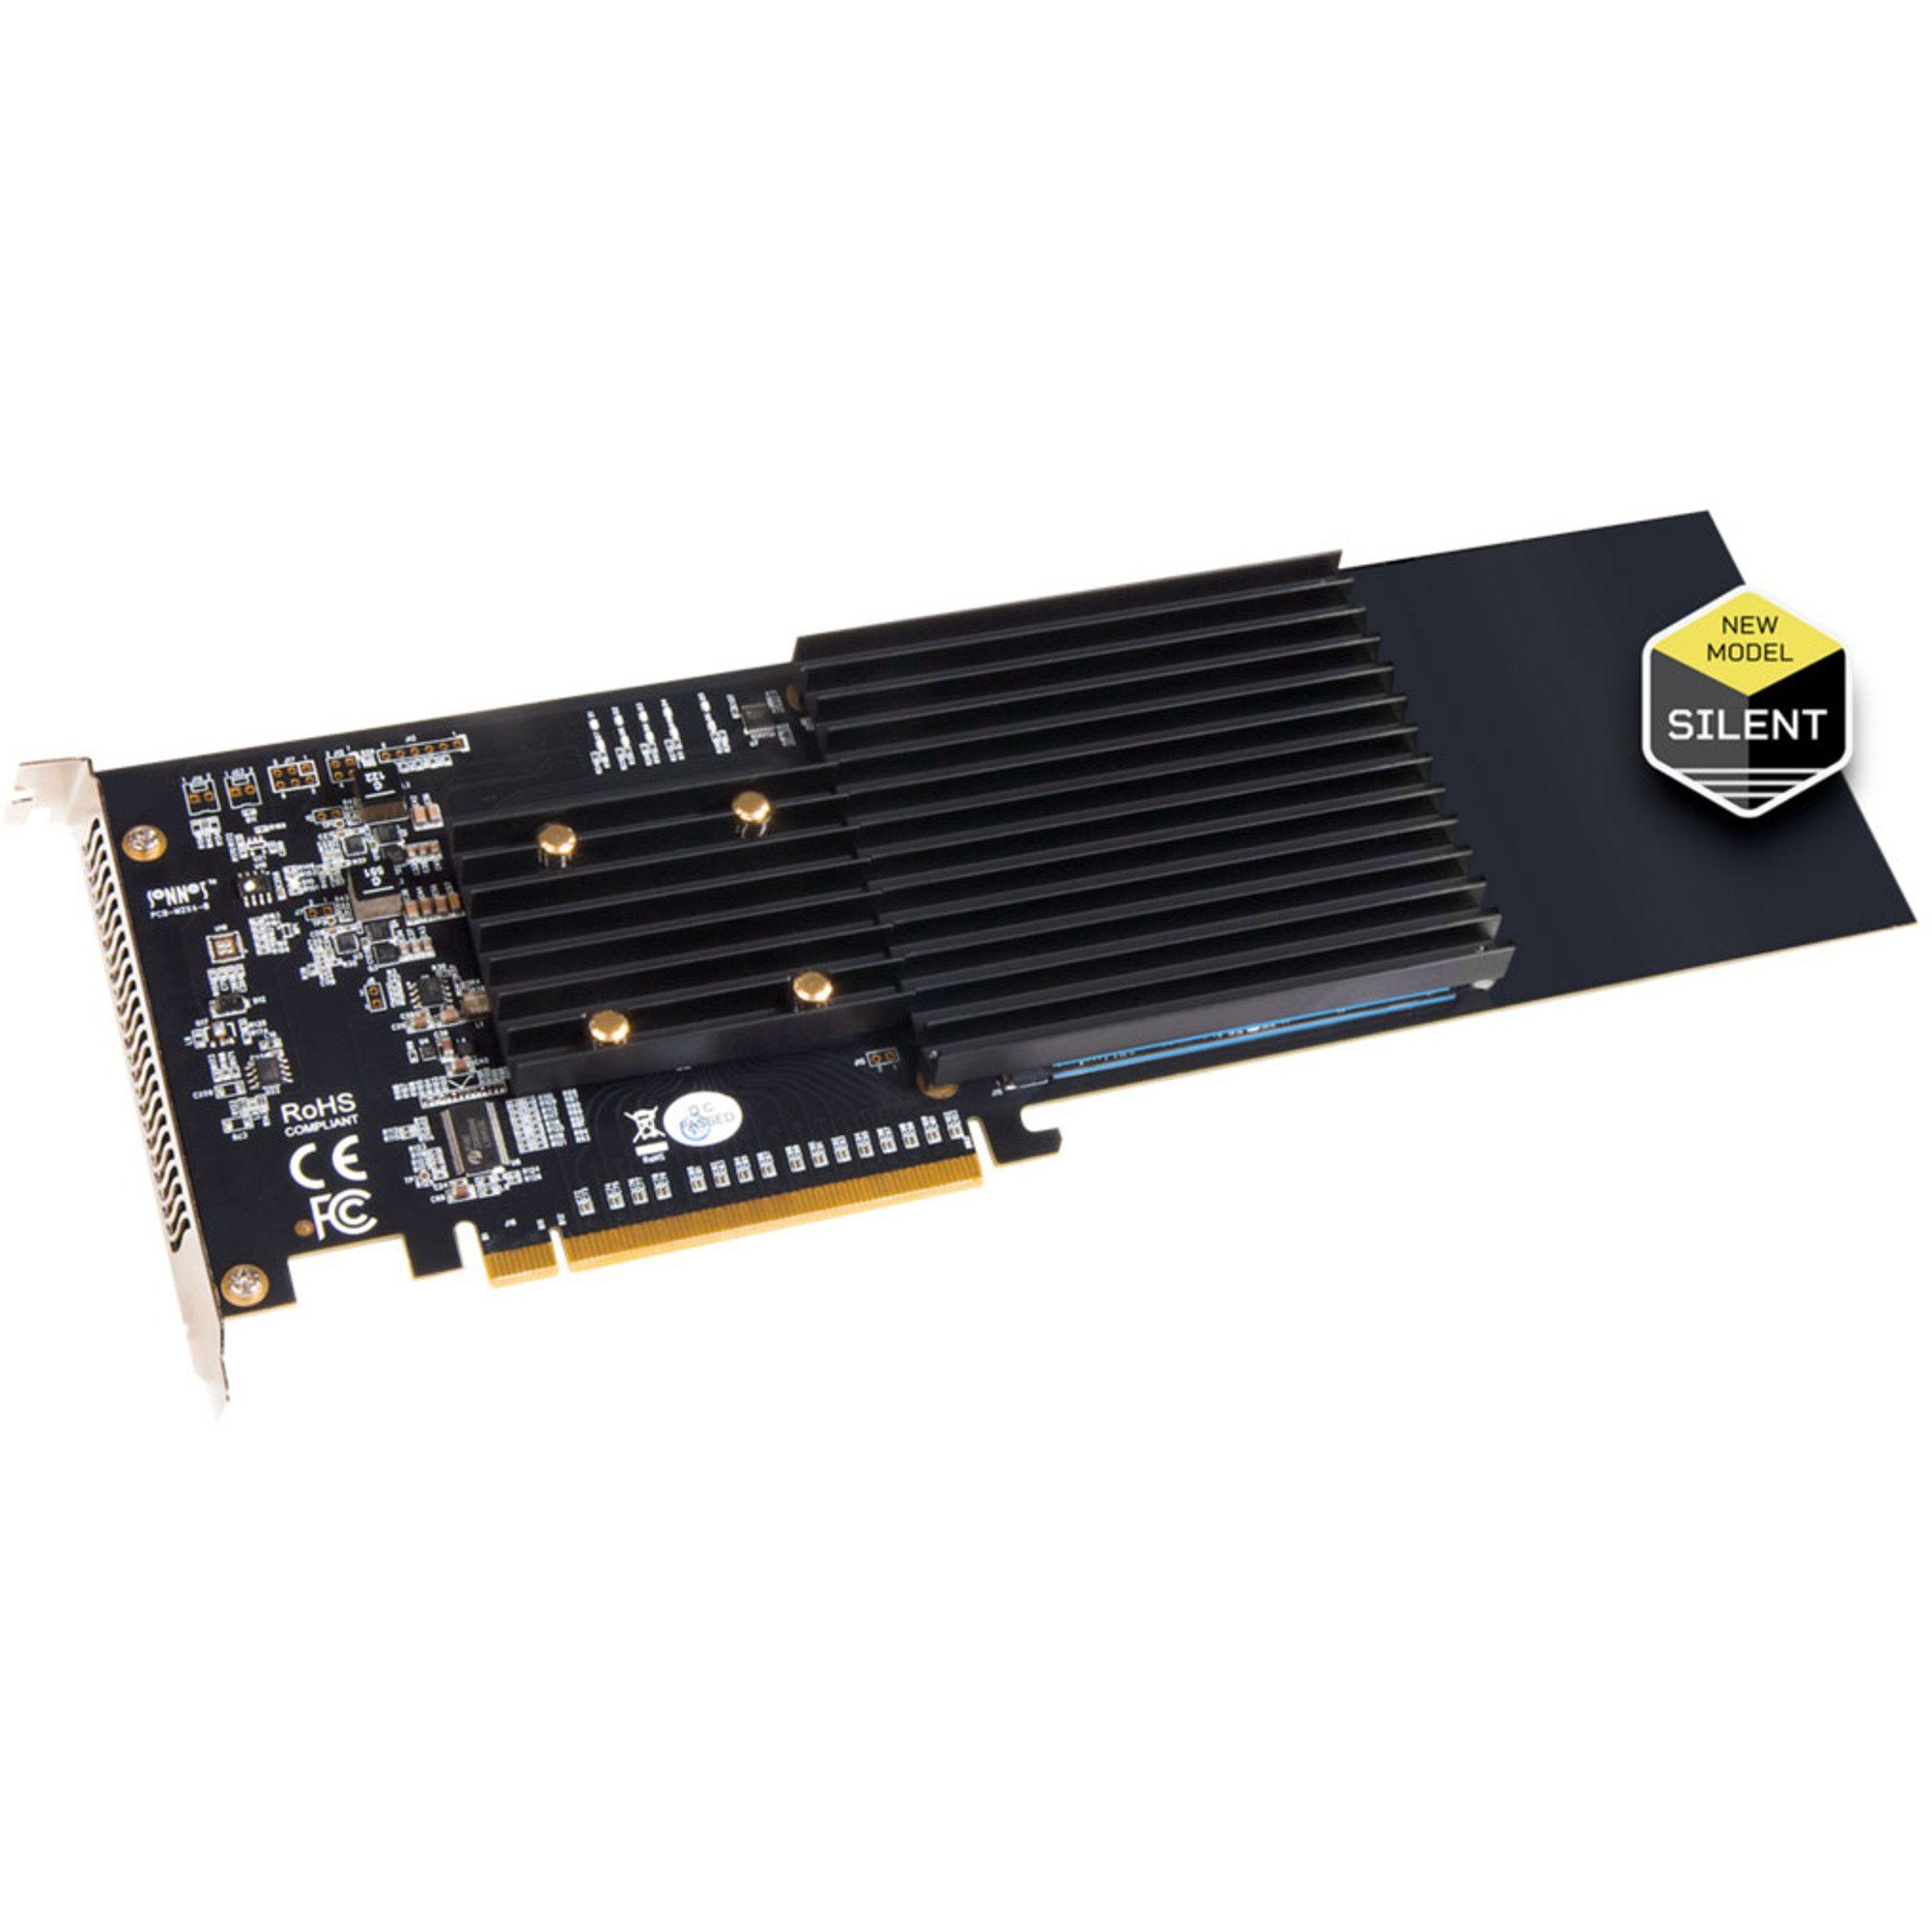 Sonnet Fusion SSD M.2 4x4 PCIe Card Mainboard